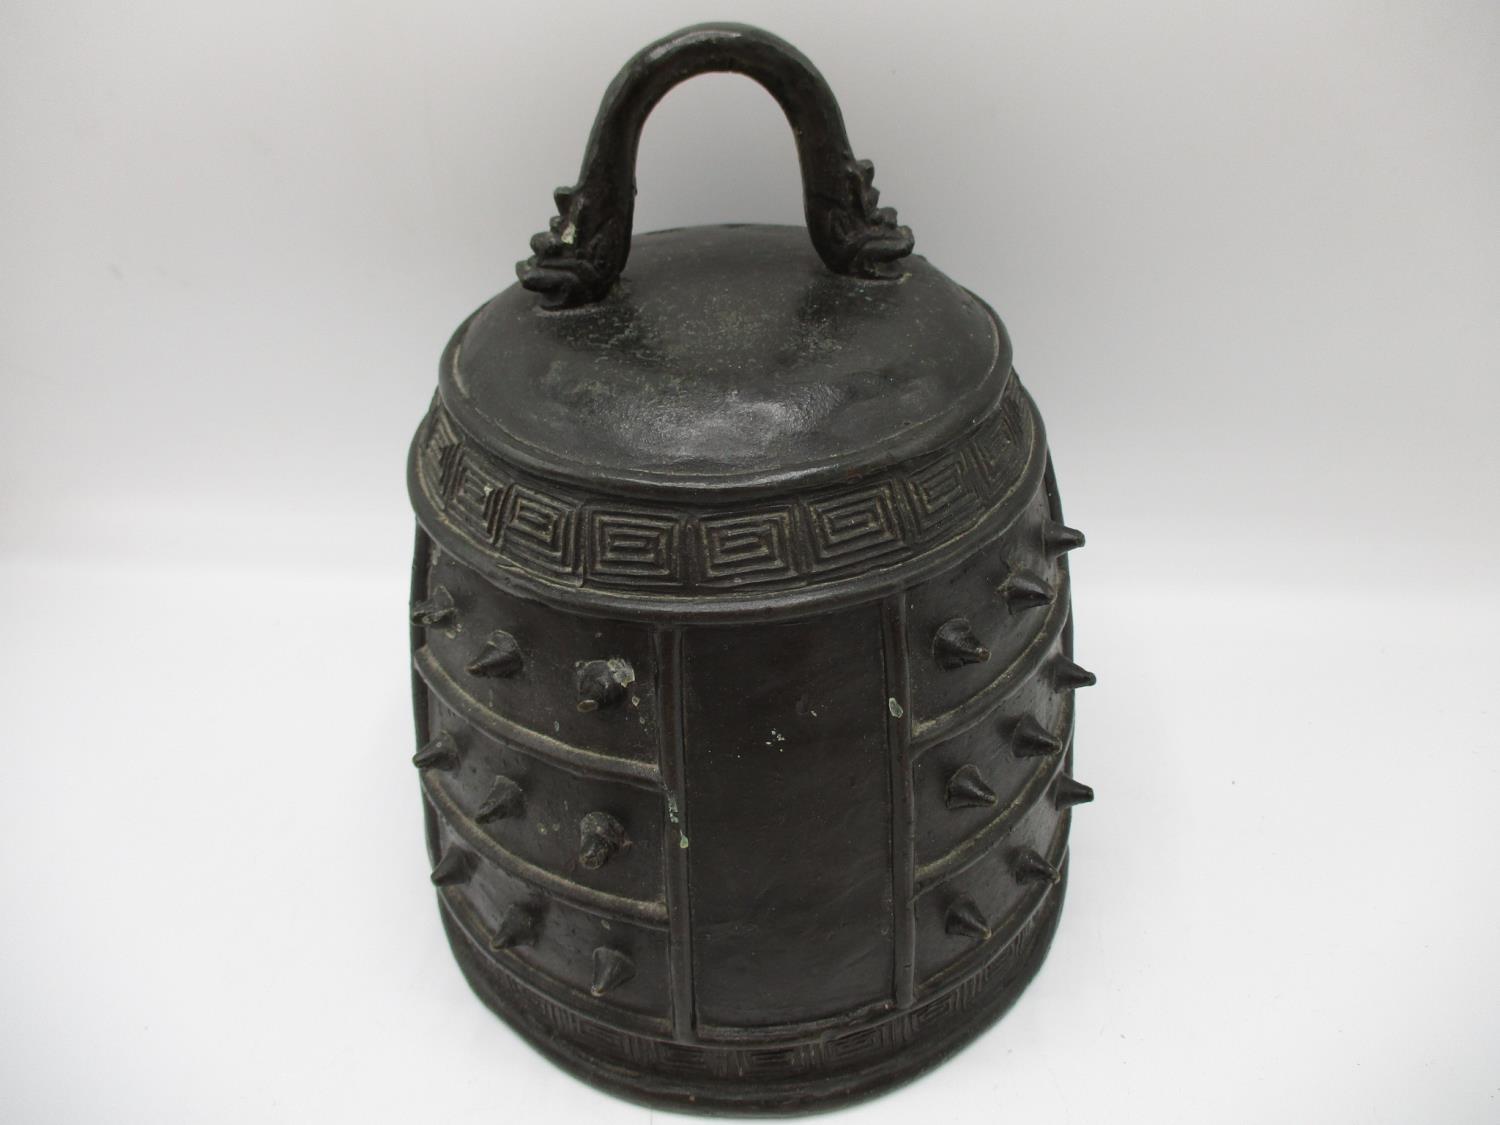 A Qing Dynasty Chinese bronze Bianzhong or chime bell with a twin mask handle, panels of - Image 5 of 7